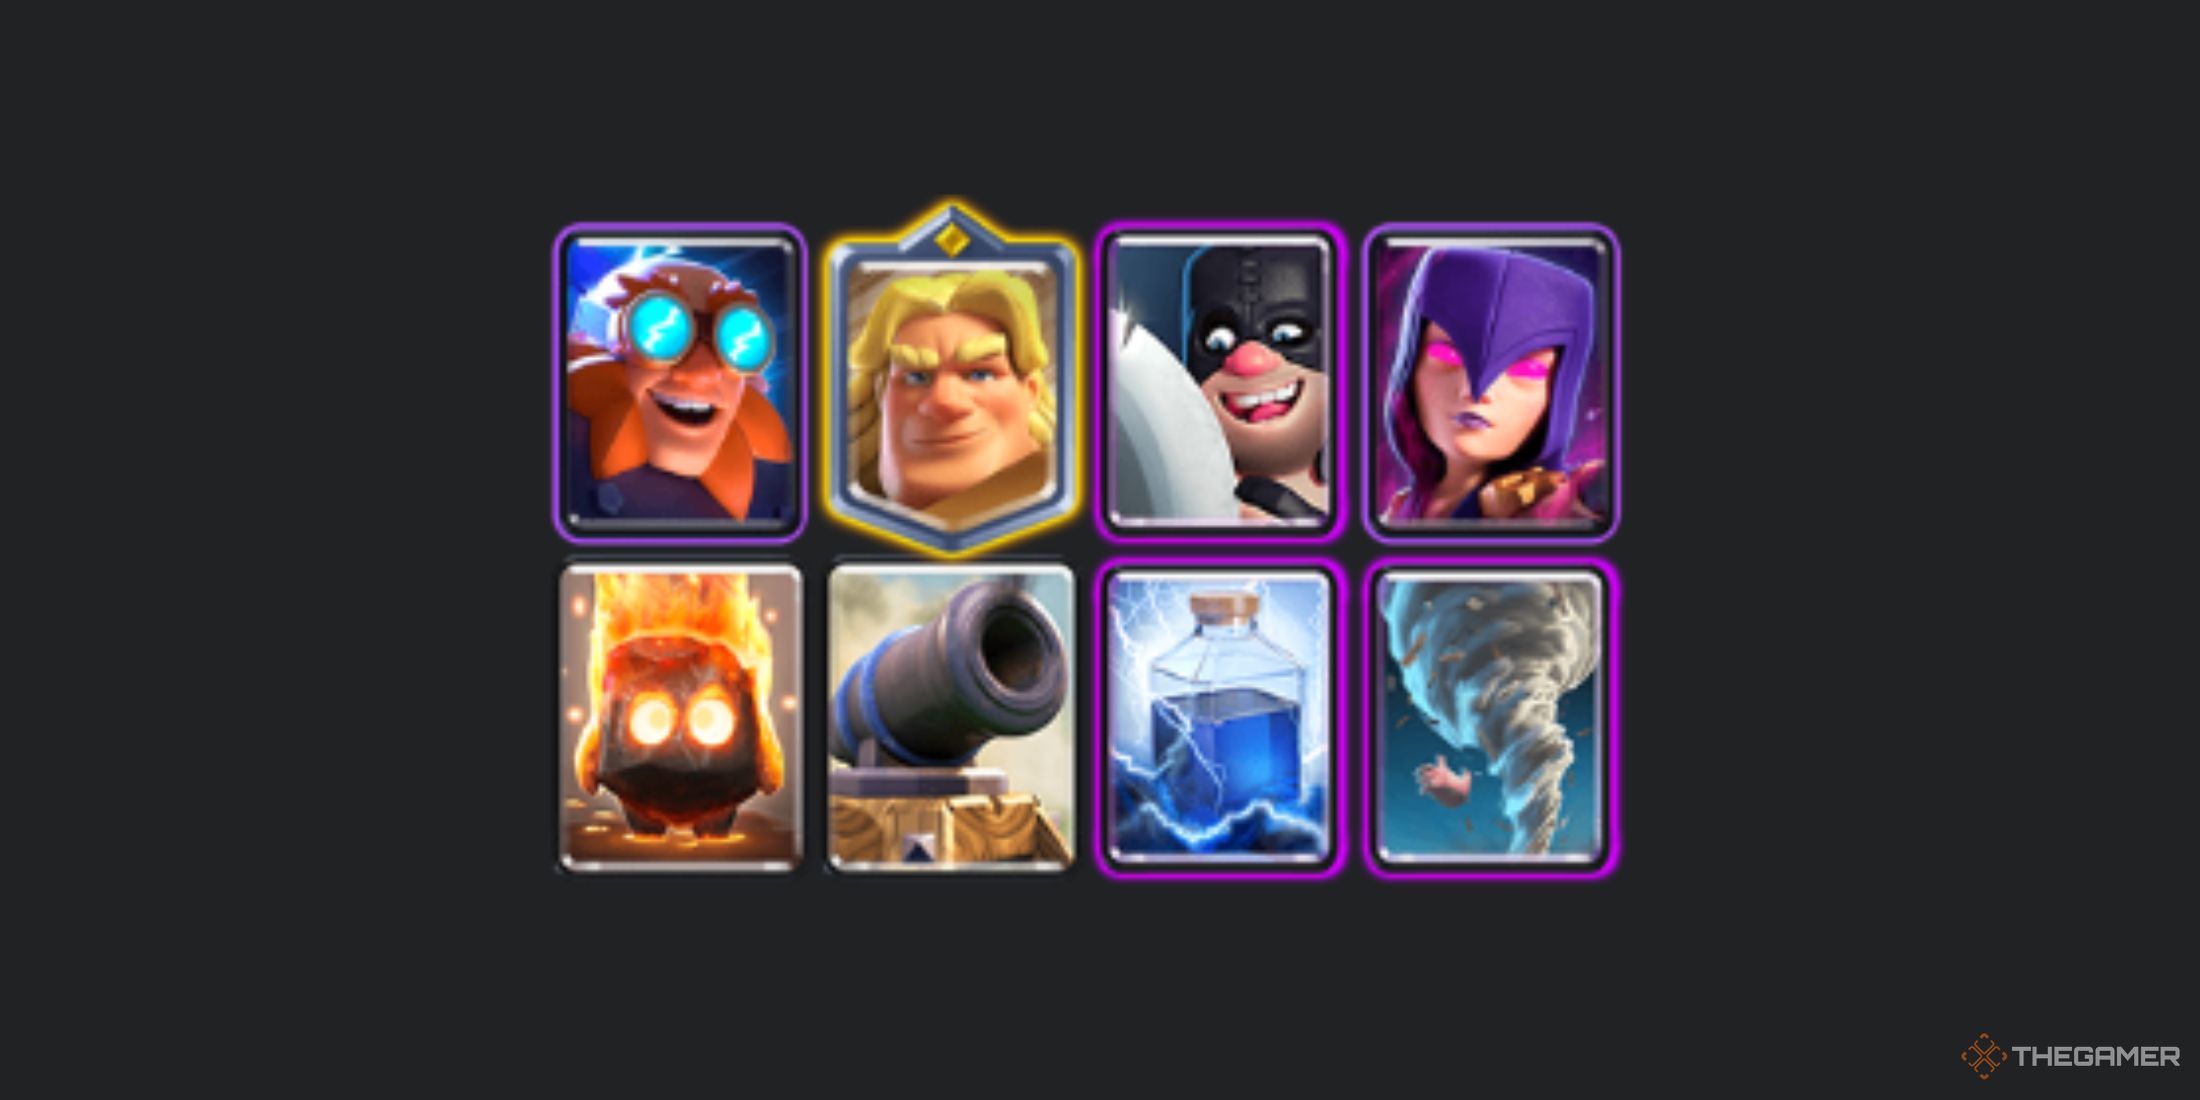 Another great deck with Clash Royale with Electro Giant, Golden Knight, Executioner, Witch, Fire Spirit, Canon, Lightning Spell and Tornado Spell.